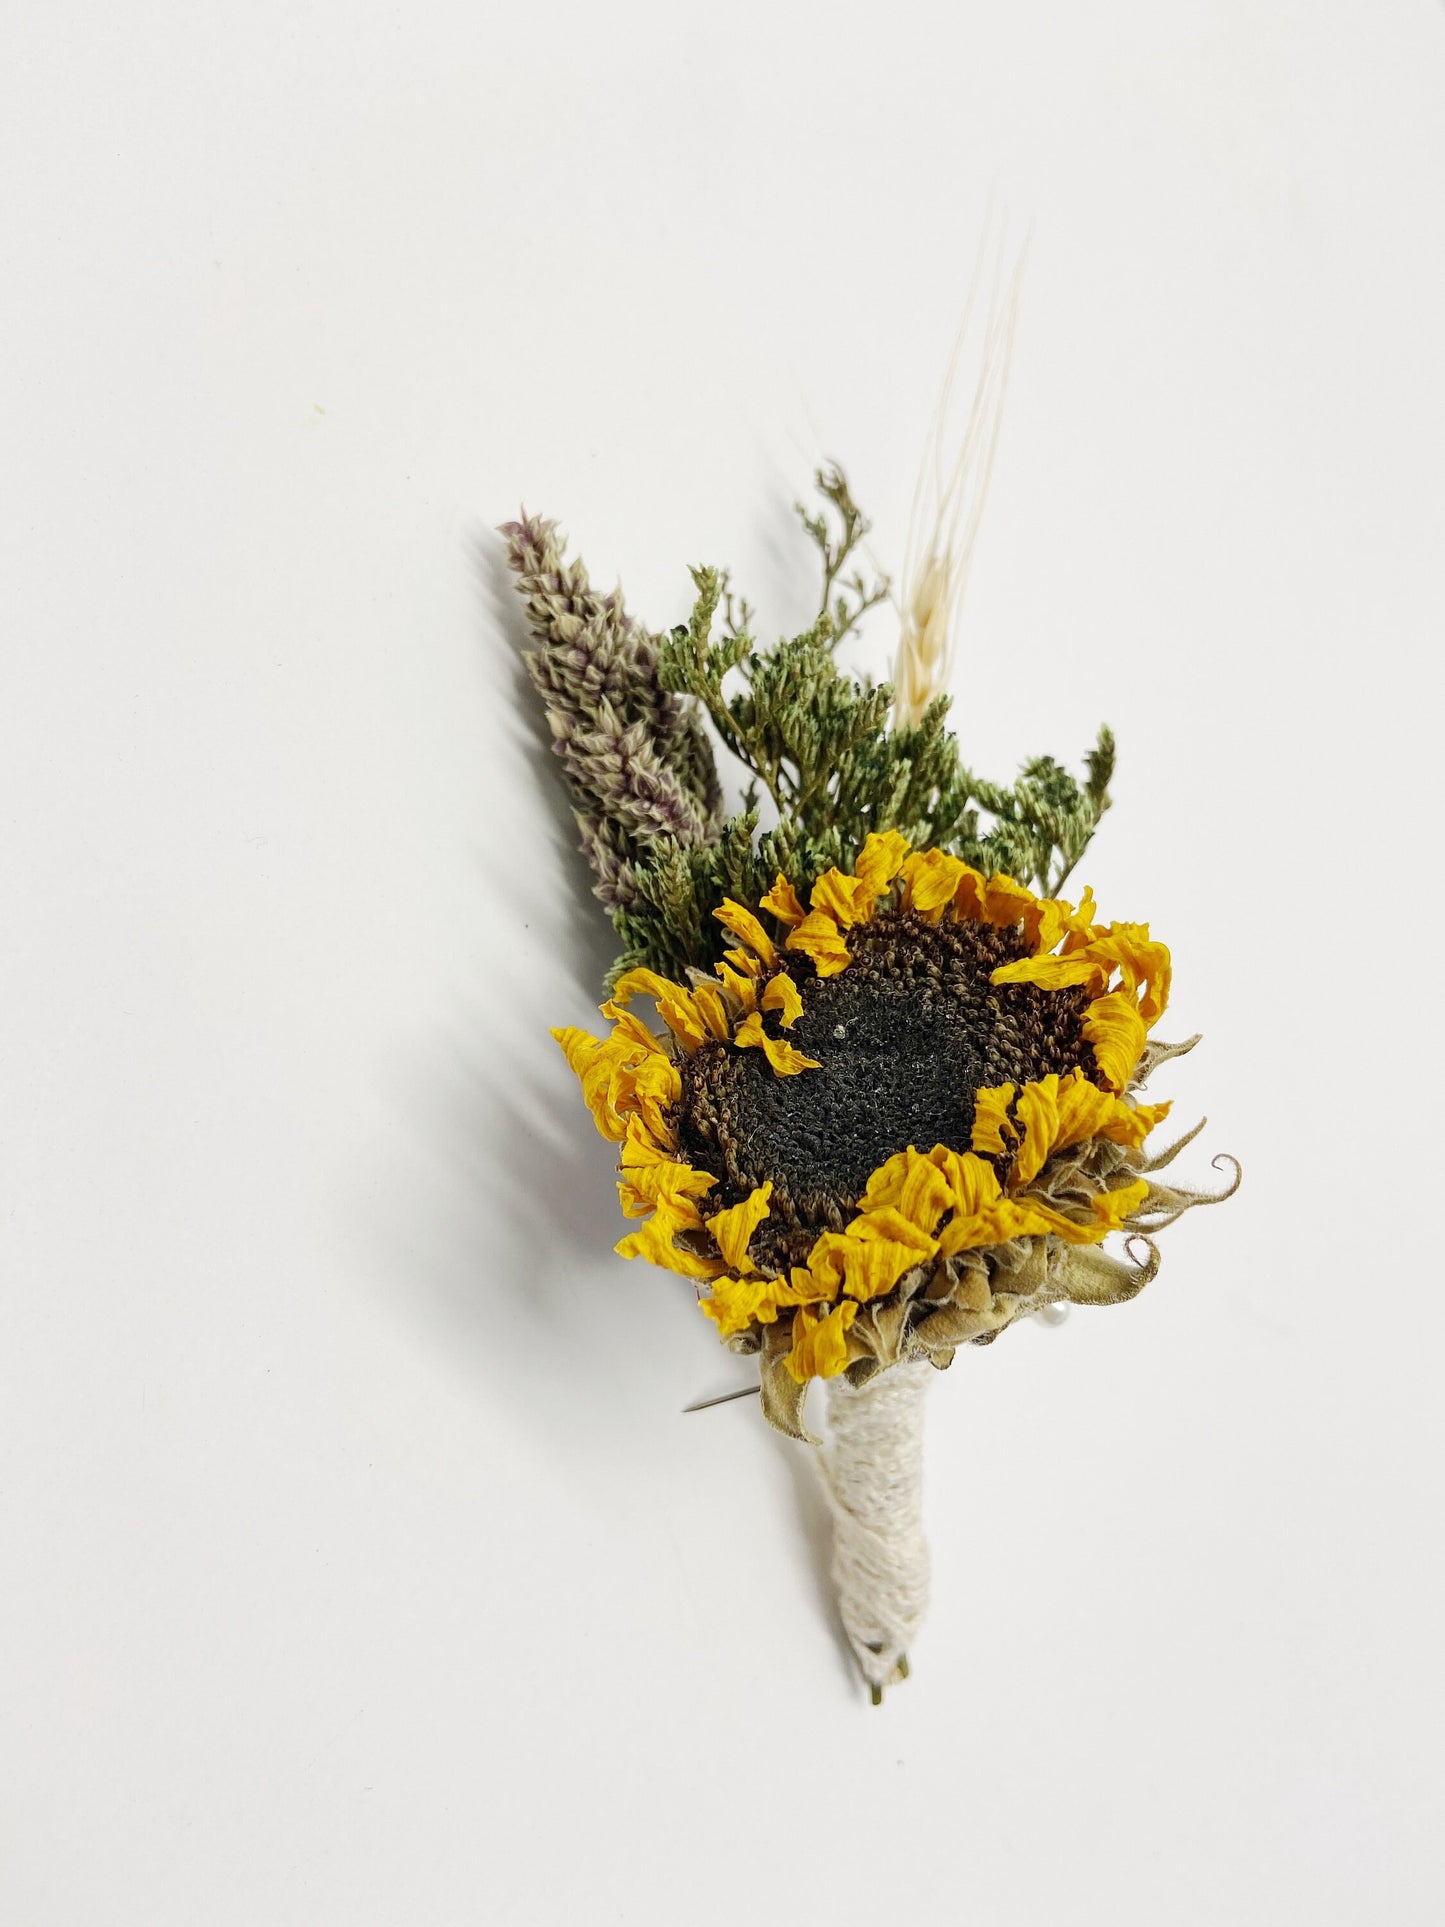 Wedding Boutonniere, Dried flowers, Preserved, Wedding Accessory, House Decoration, Rustic Wedding, Simplicity, Simple, Neutral